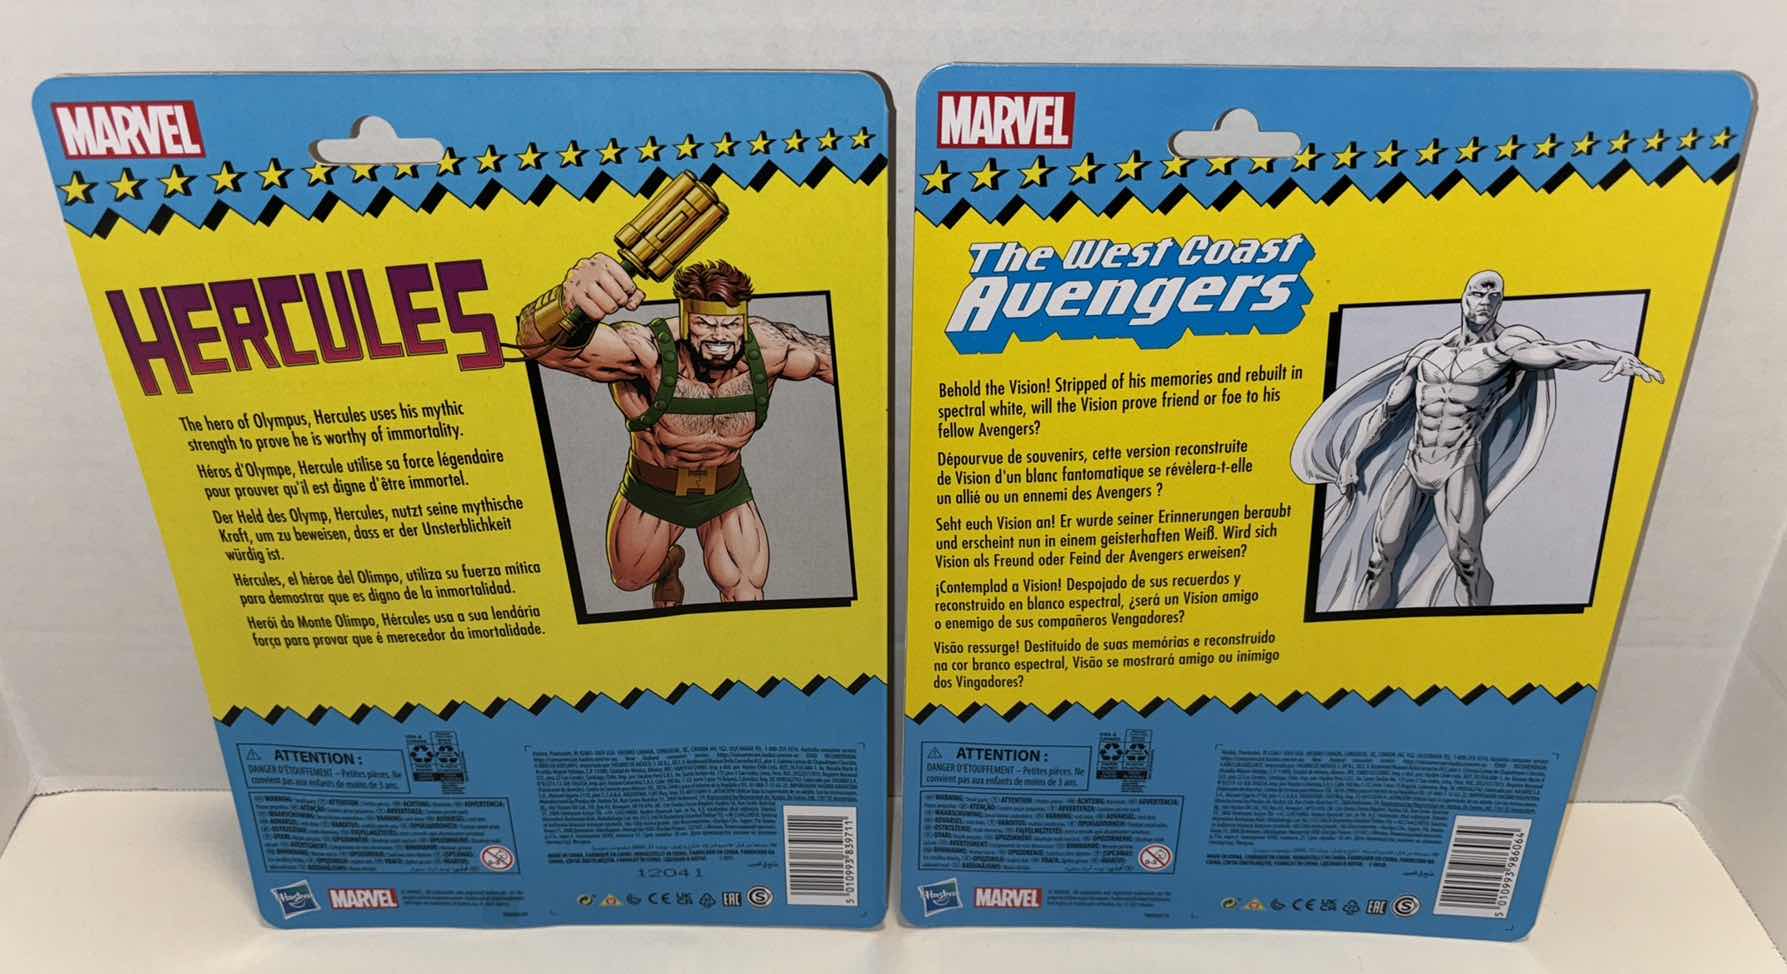 Photo 4 of NEW HASBRO MARVEL RETRO COLLECTION 2-PACK BUNDLE ACTION FIGURES & ACCESSORIES, “HERCULES” & “THE VISION”